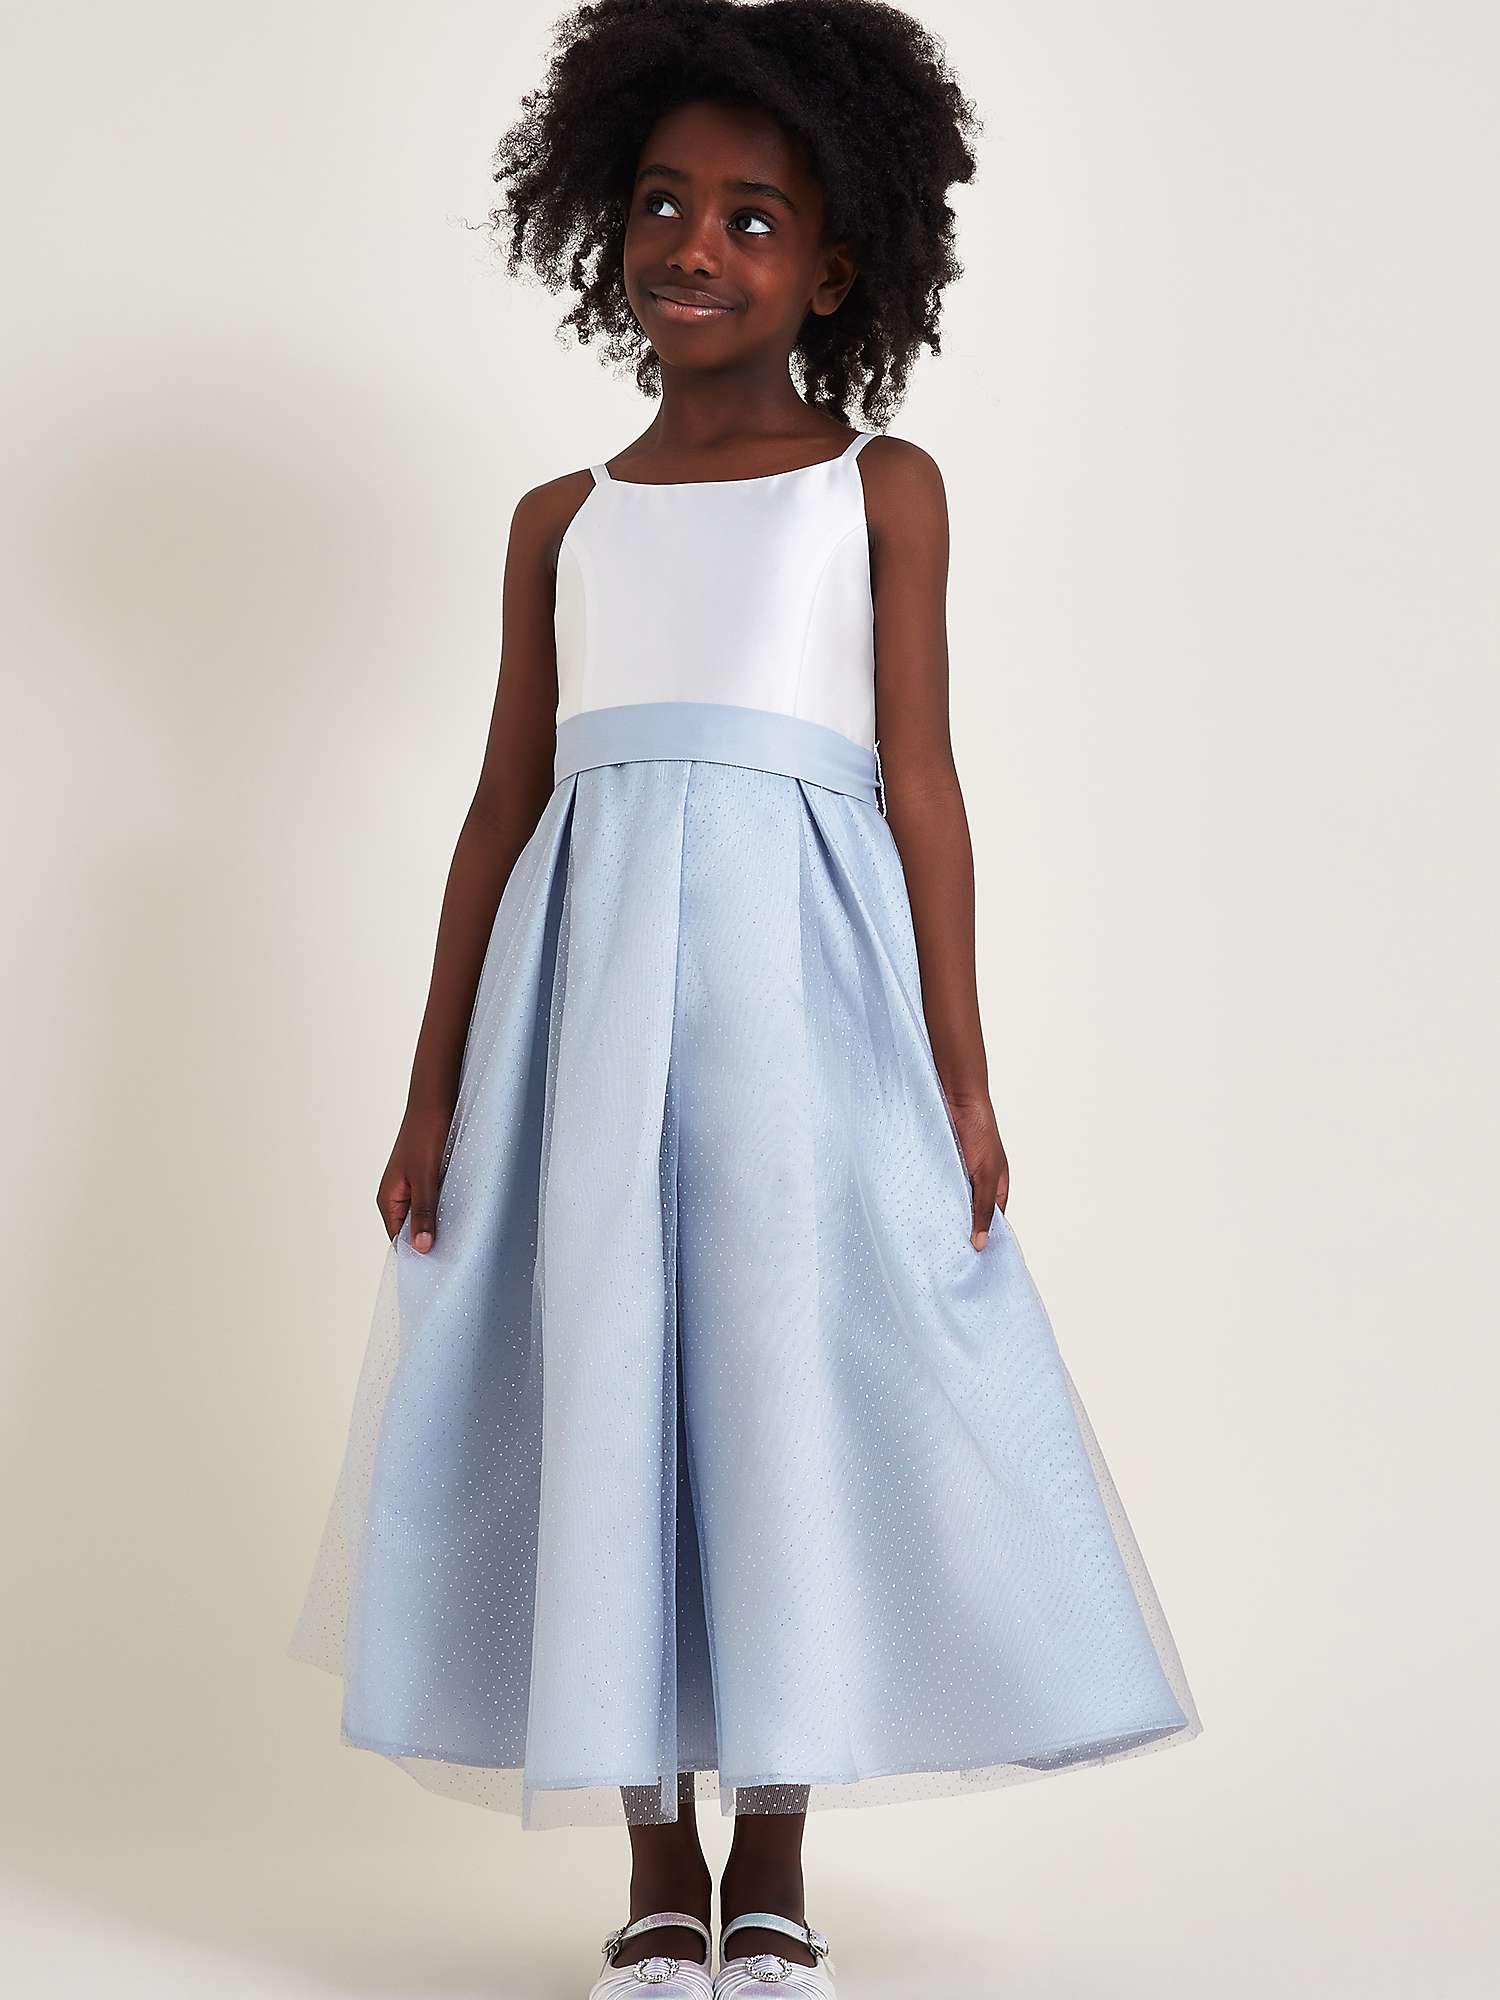 Buy Monsoon Kids' Anastasia Glitter Tulle Bow Occasion Maxi Dress, Pale Blue Online at johnlewis.com